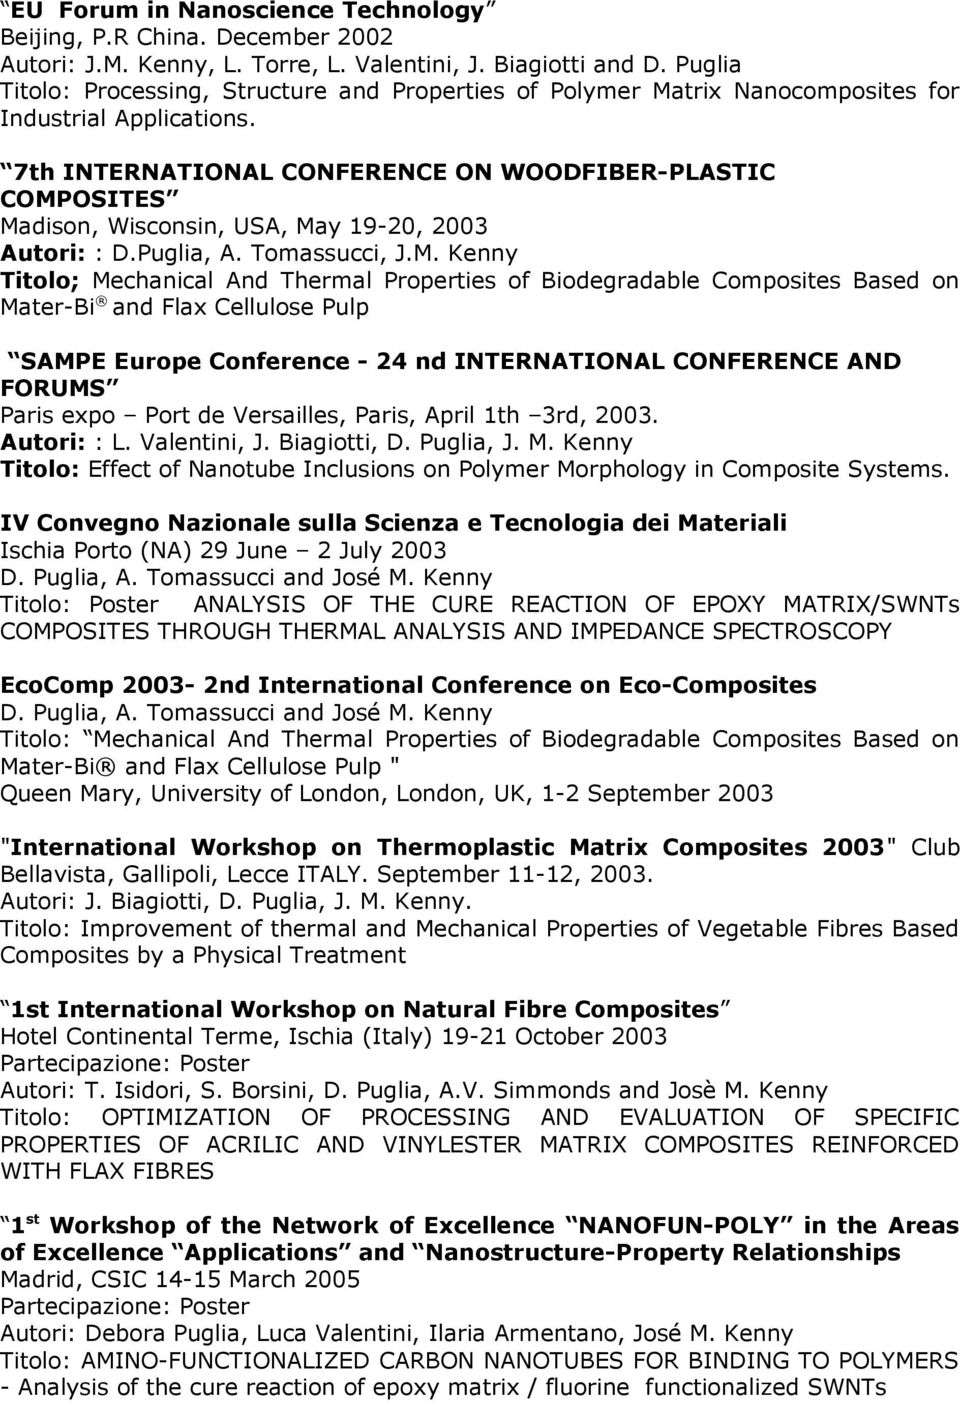 7th INTERNATIONAL CONFERENCE ON WOODFIBER-PLASTIC COMP